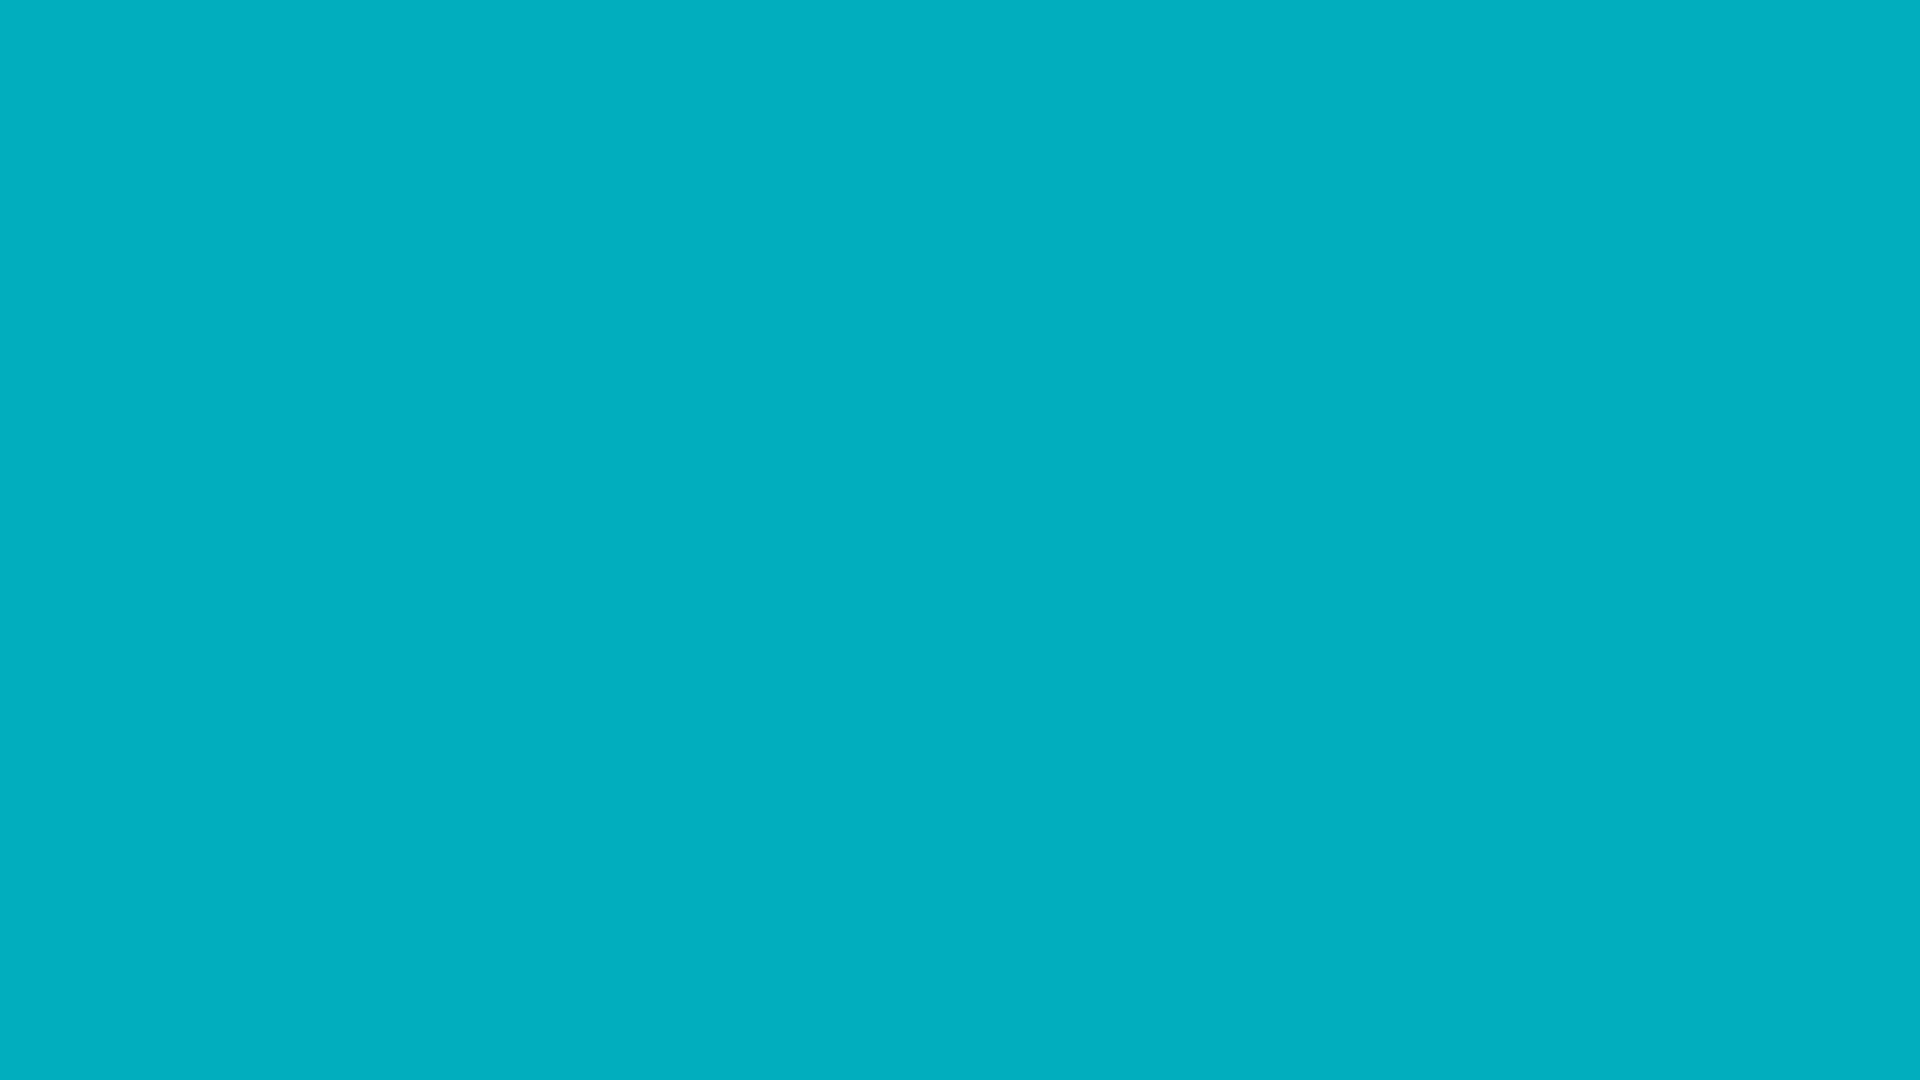 GARDENA turquoise background color